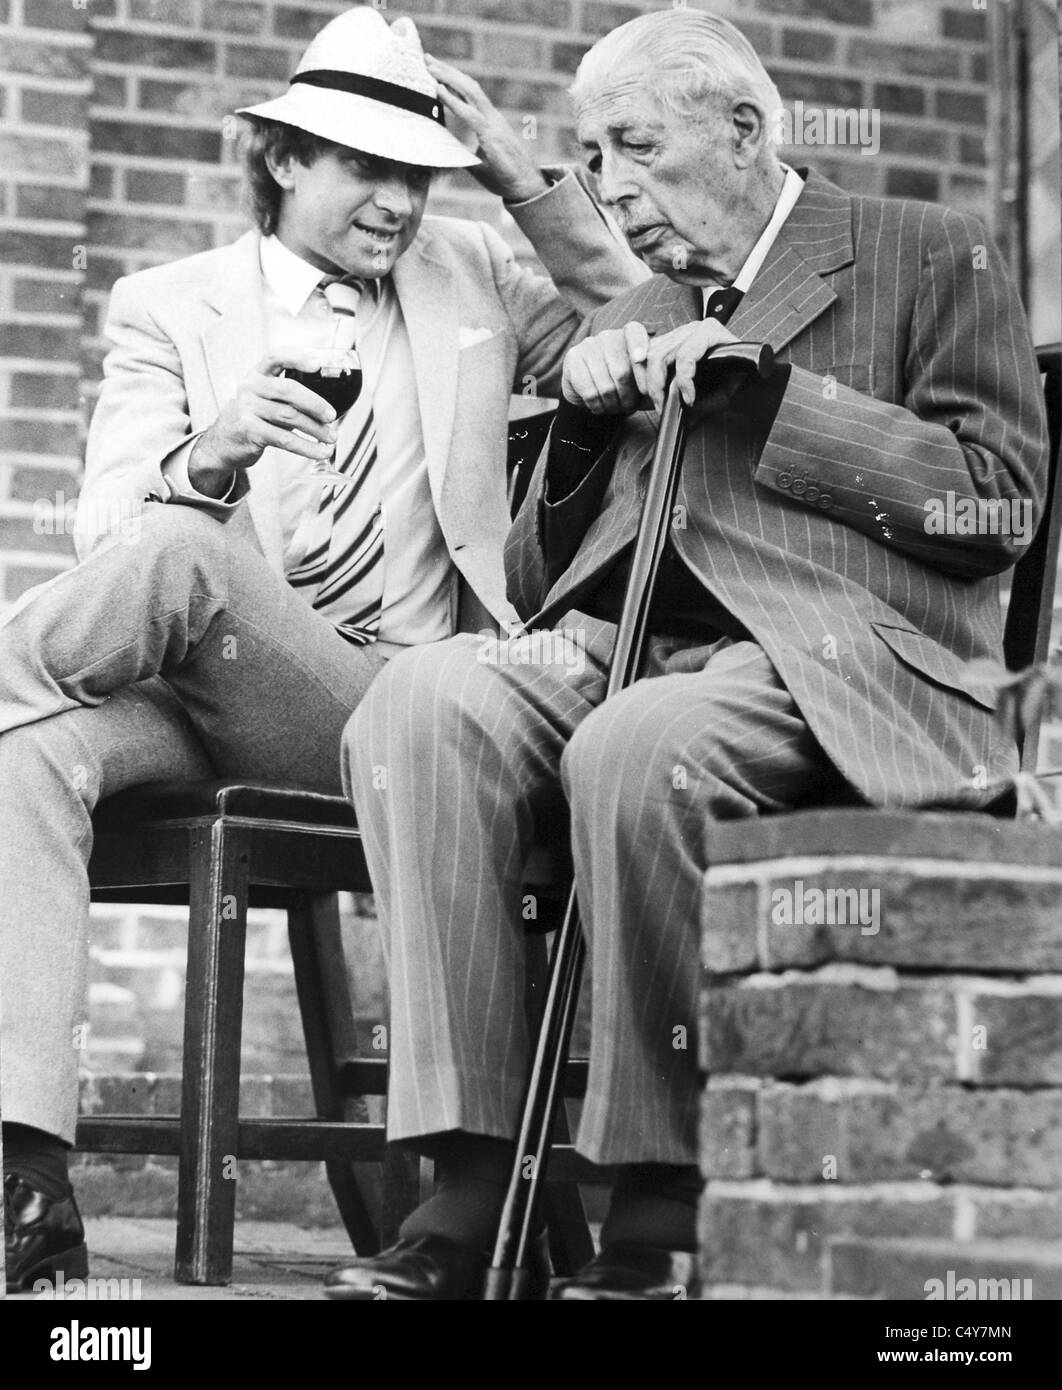 Former prime minister Harold Macmillan (now deceased) with MP Michael Fabricant at a garden party in Sussex - 1985 Stock Photo